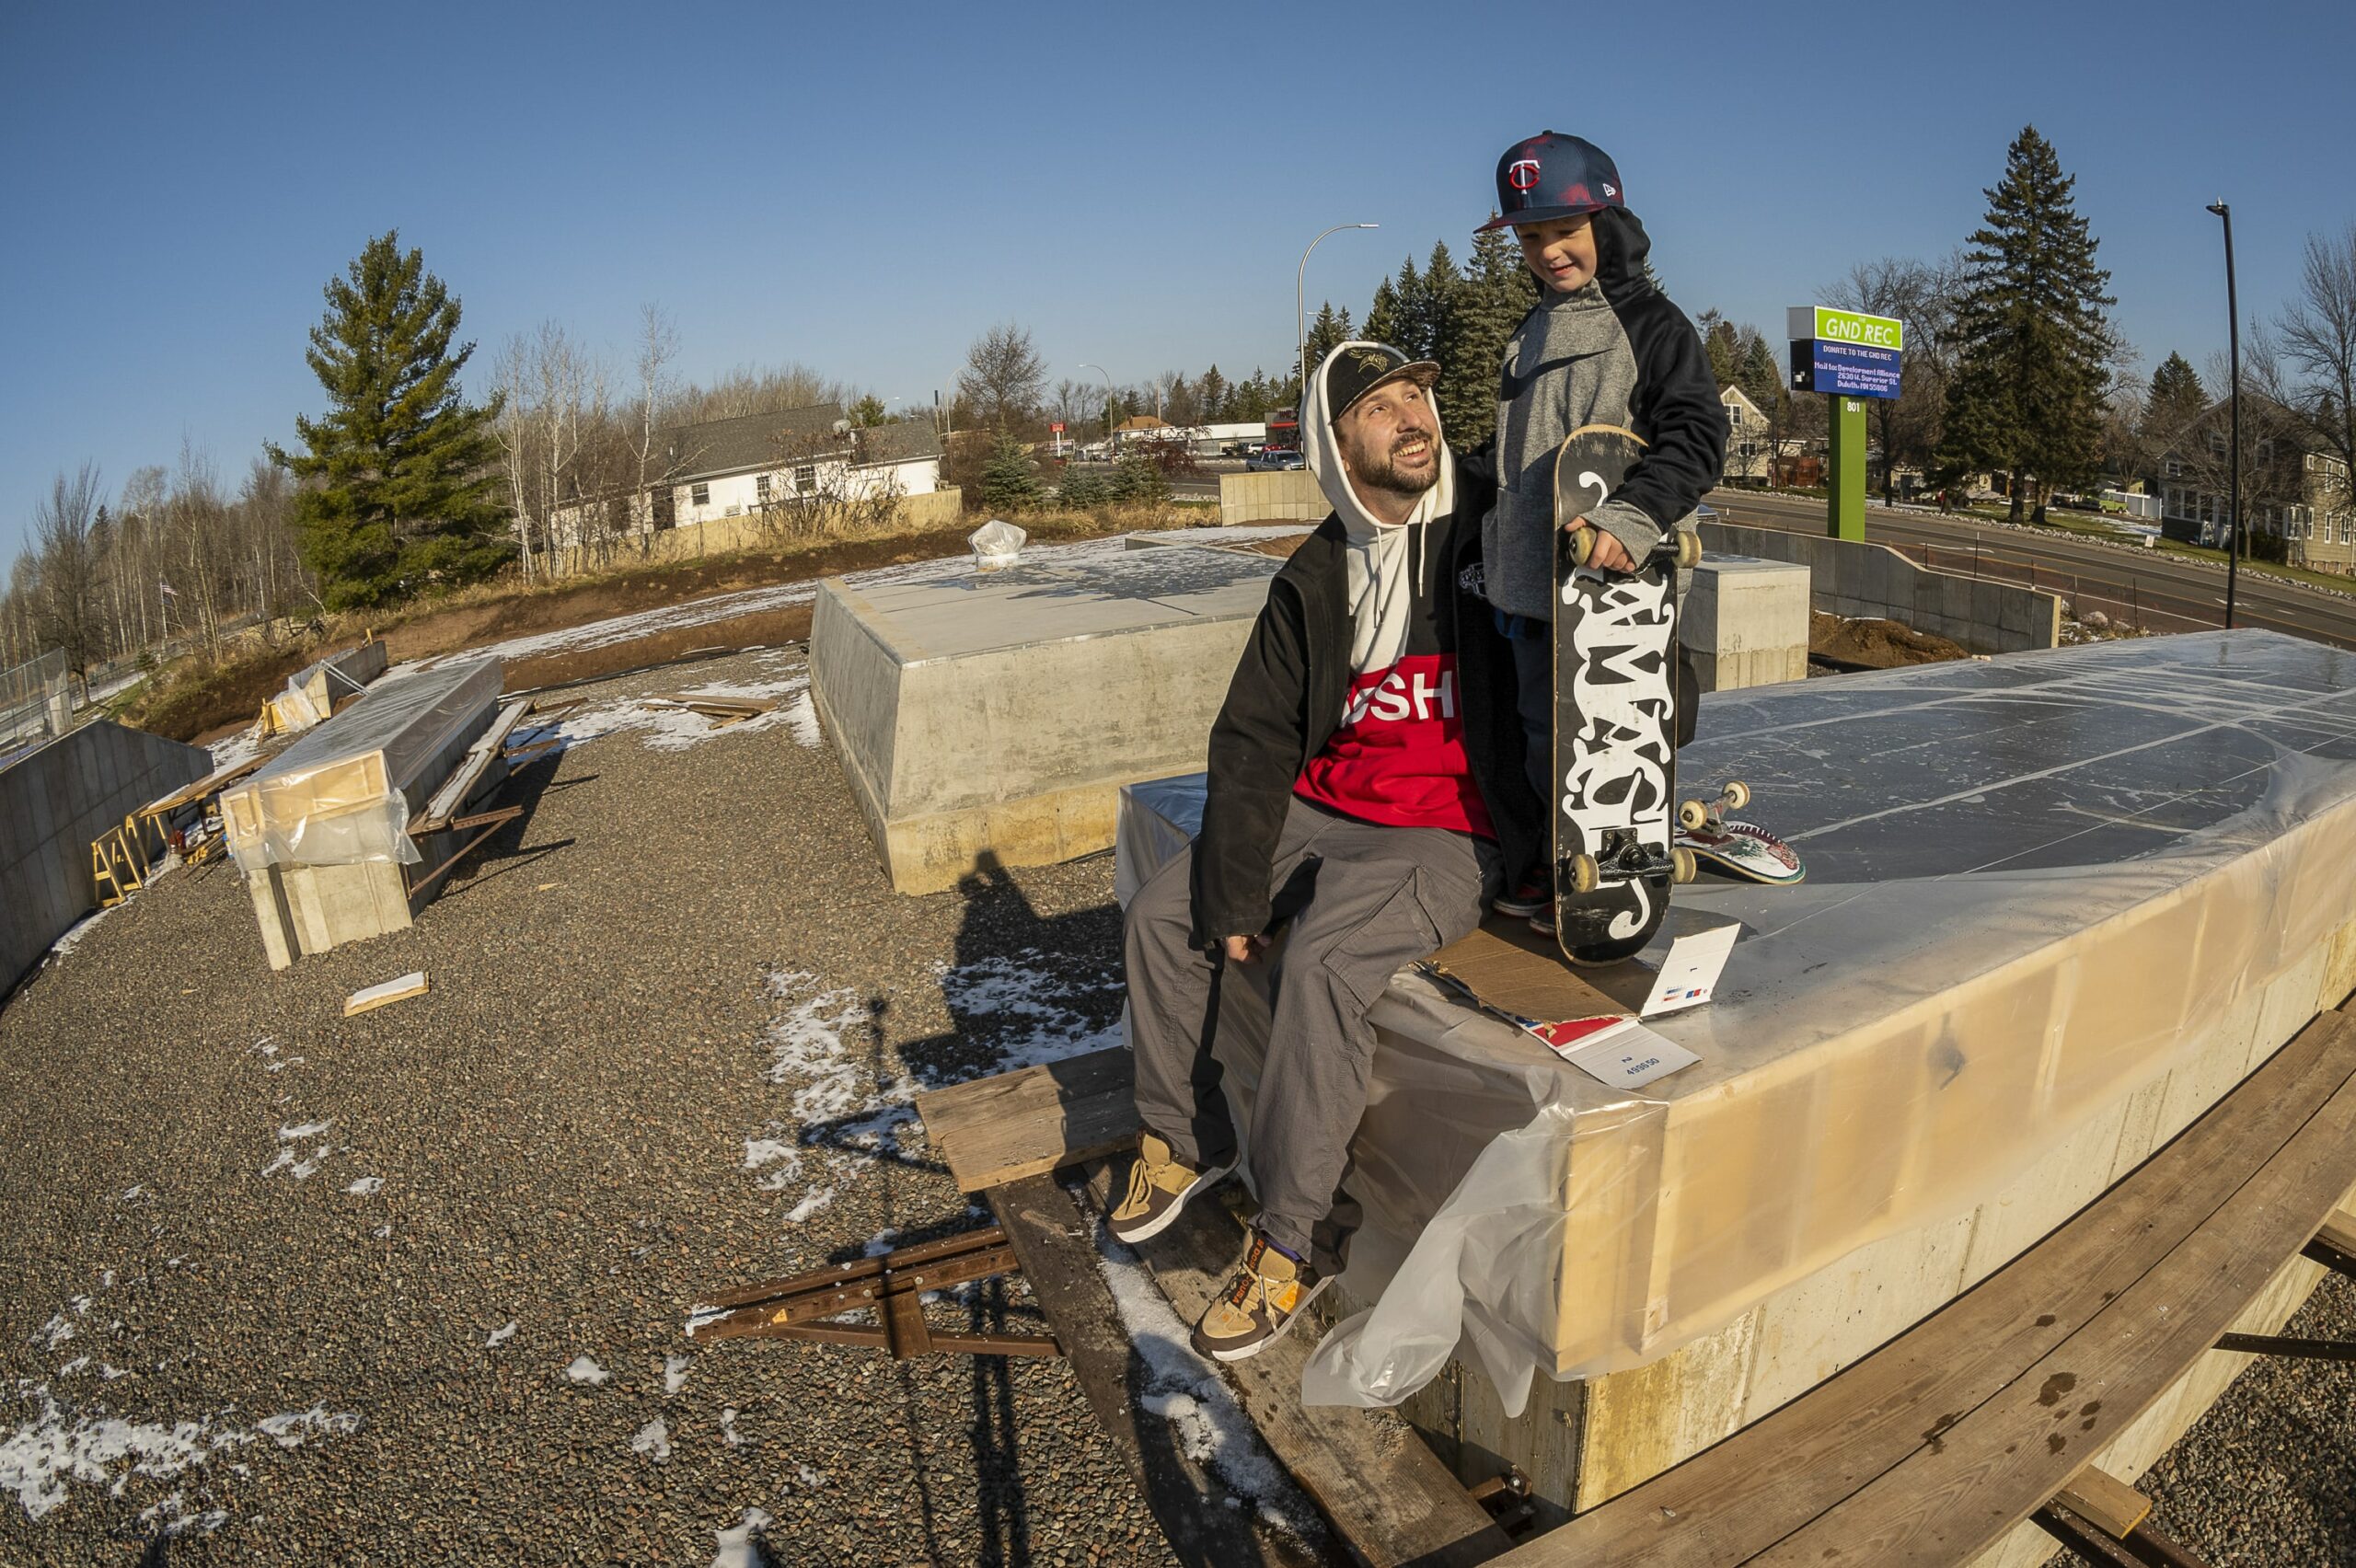 A man smiles at a young boy who is holding a skateboard on top of construction materials